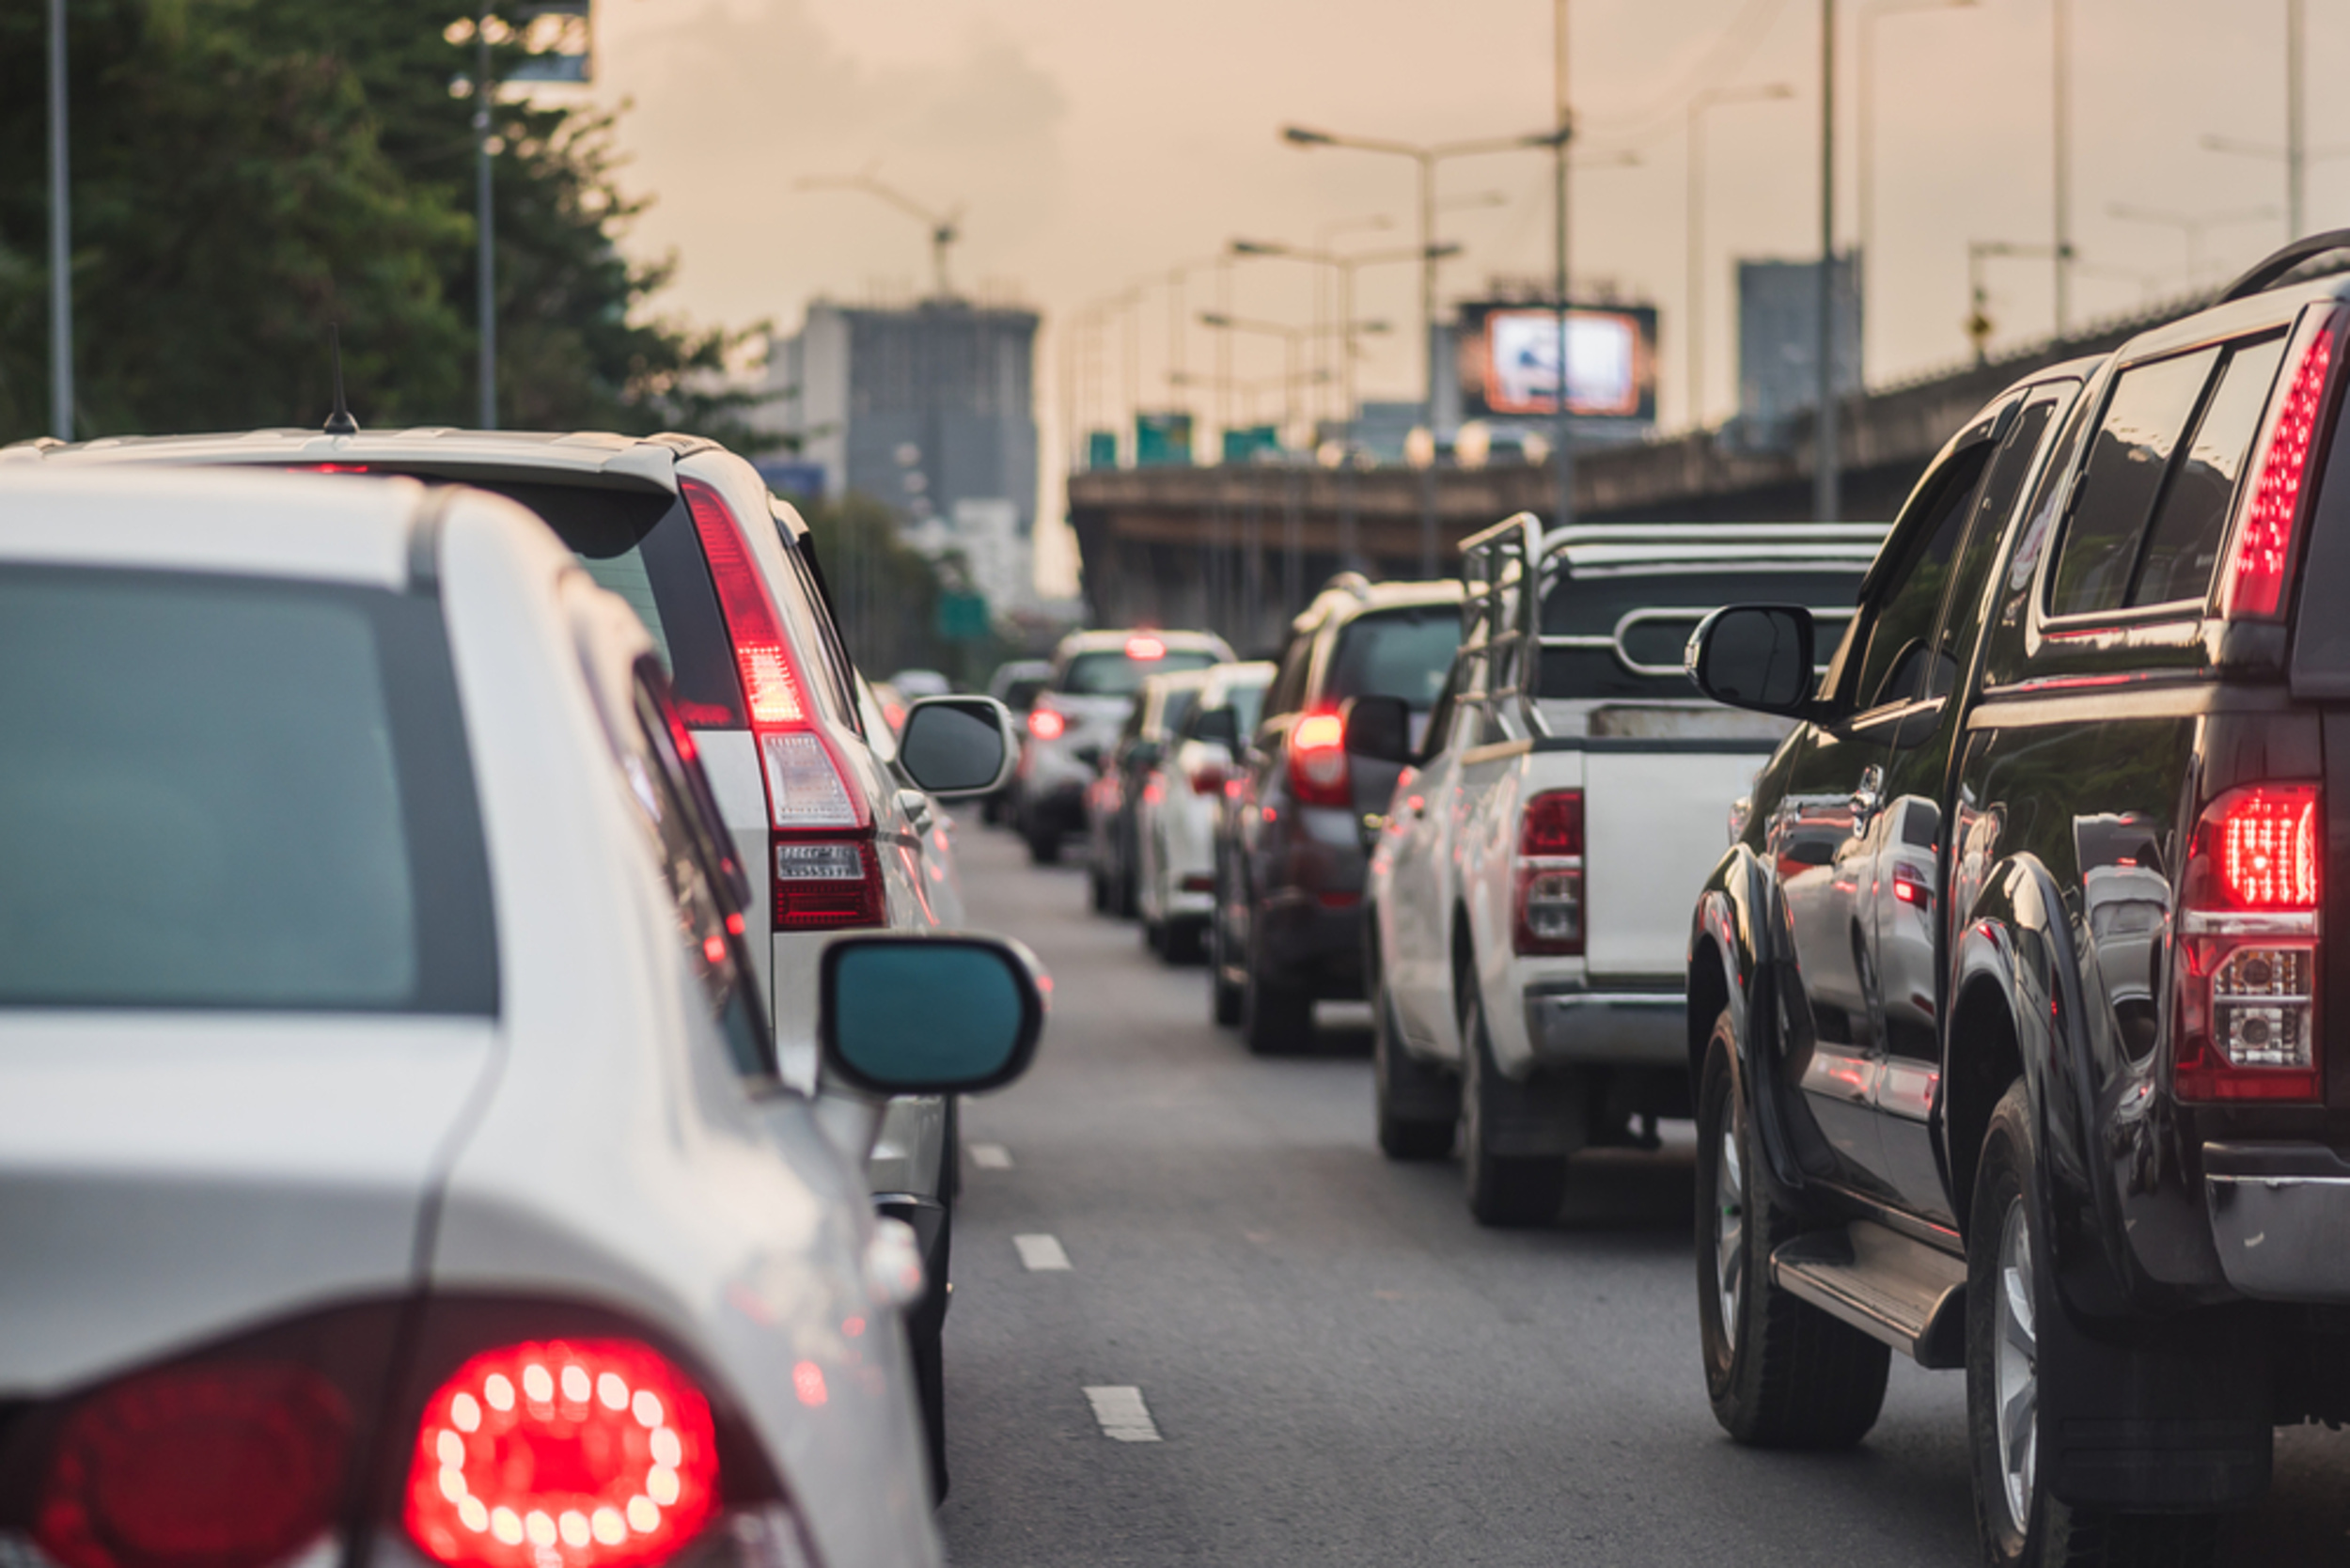 <p>If you're traveling to a city, it's important to know when the traffic will be worst. Try to plan your departure and arrival times around rush hour, even if that means leaving a little earlier (or arriving a bit later) than you might have hoped. </p><p><a href='https://www.msn.com/en-us/community/channel/vid-cj9pqbr0vn9in2b6ddcd8sfgpfq6x6utp44fssrv6mc2gtybw0us'>Follow us on MSN to see more of our exclusive lifestyle content.</a></p>